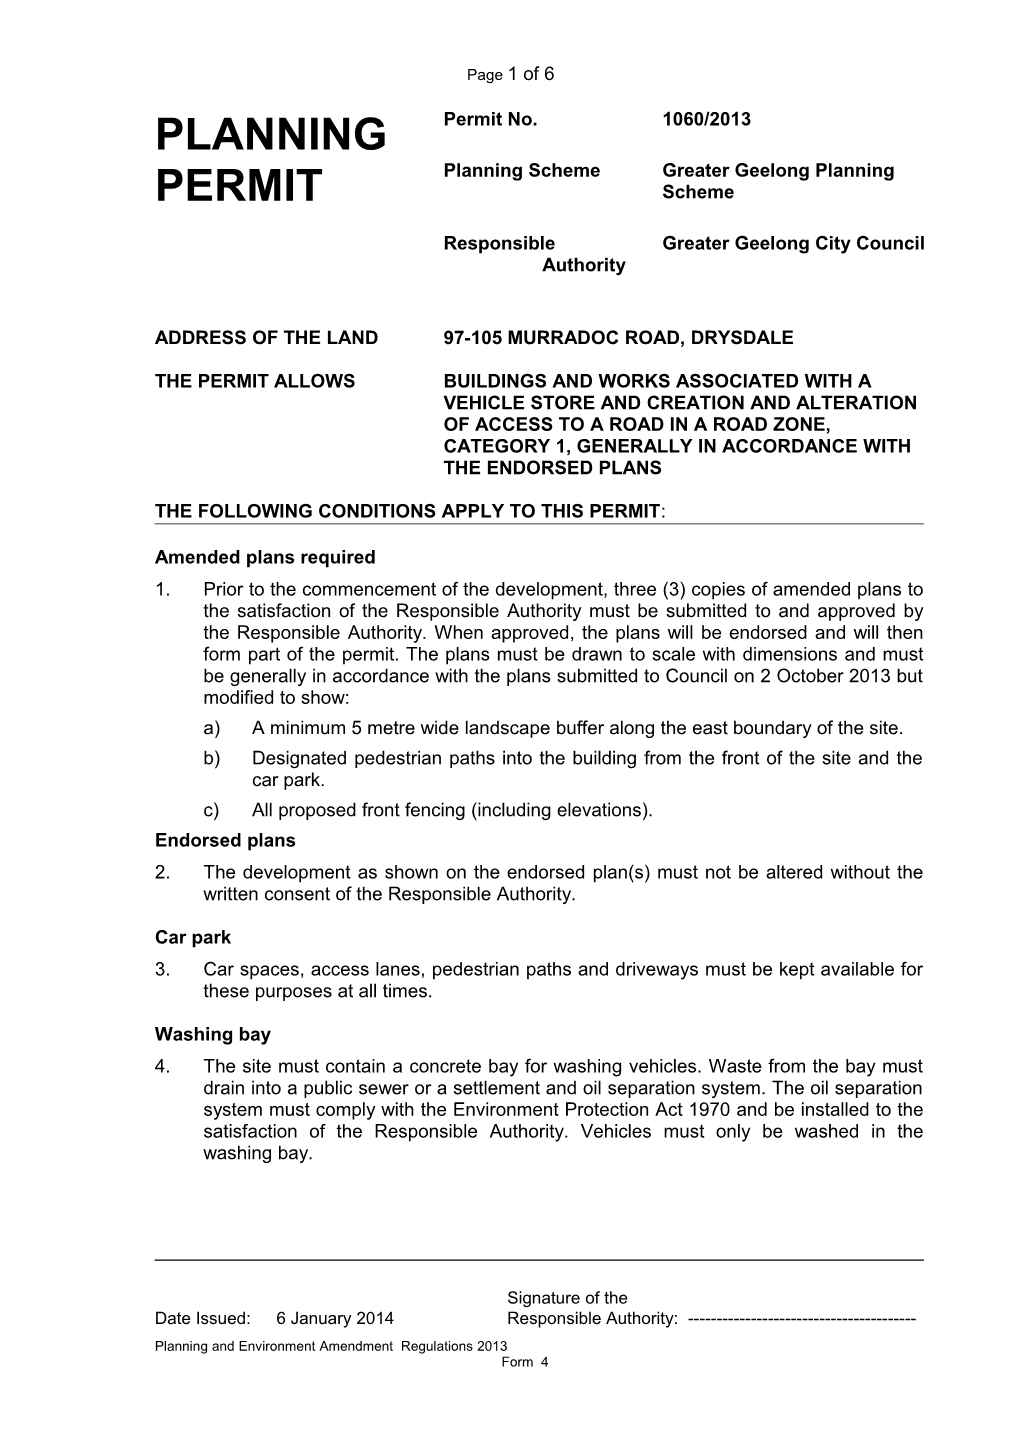 Conditions of Planning Permit Number 1060/2013 Continued